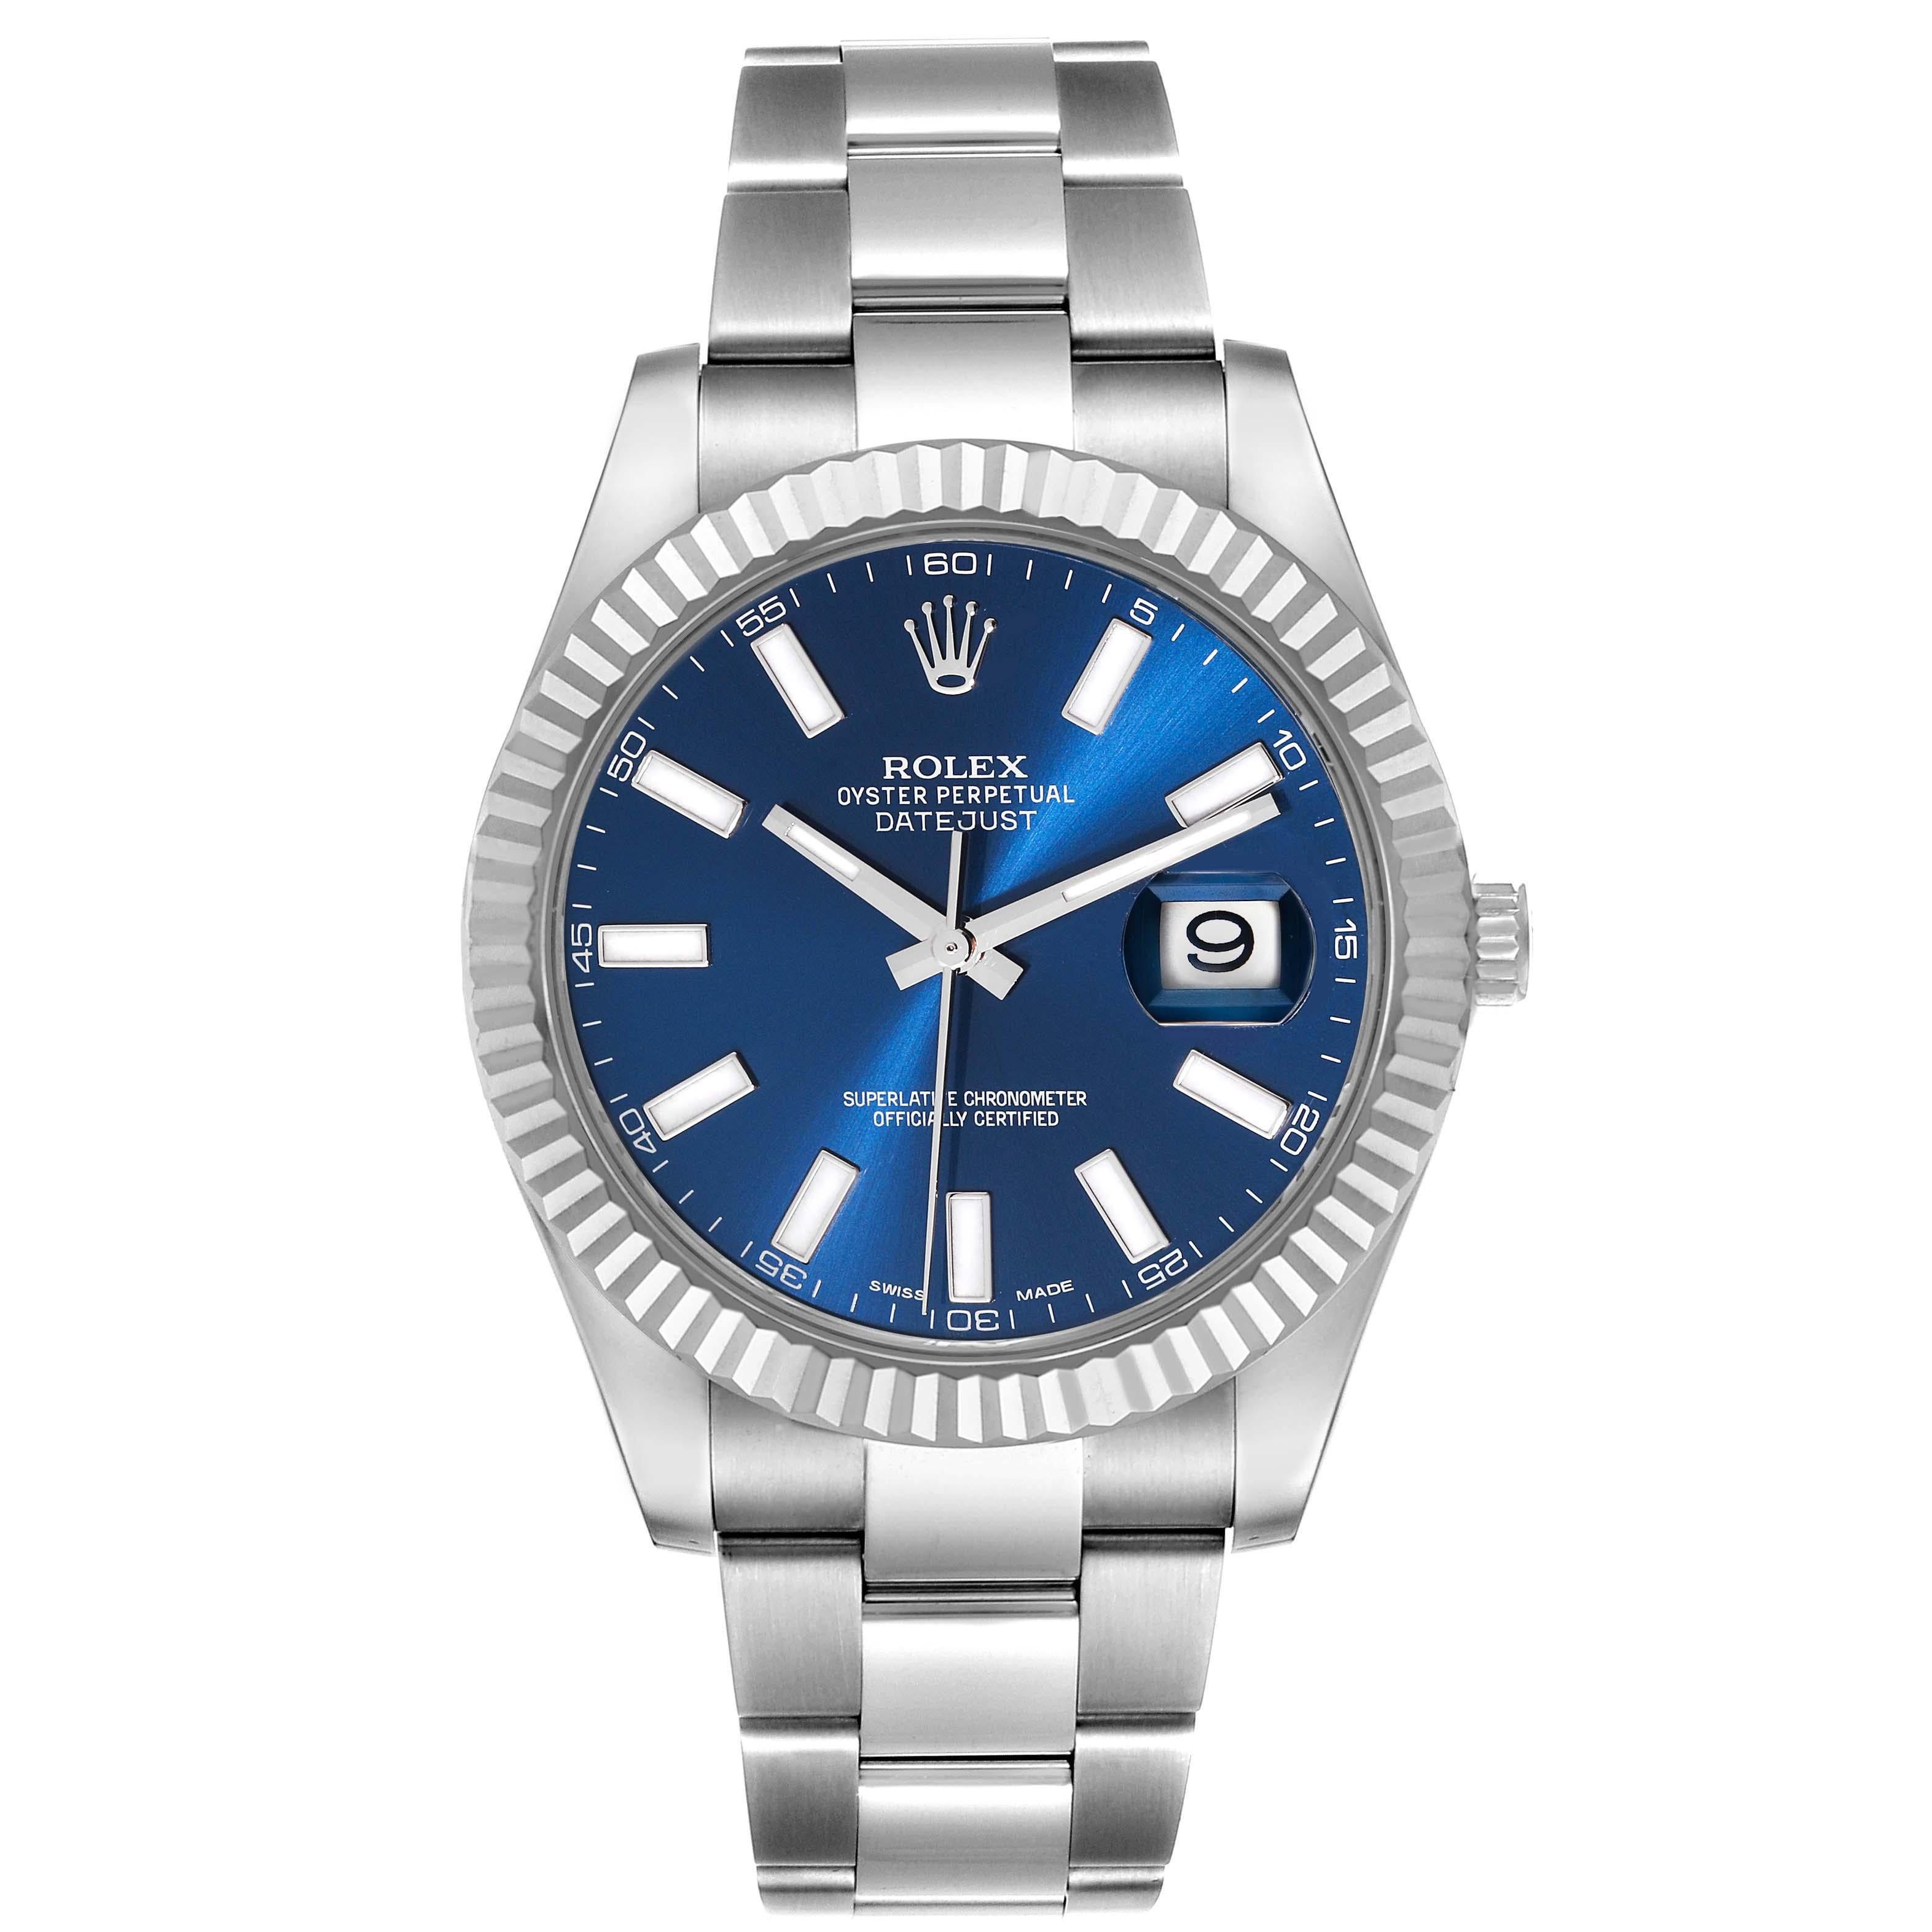 Rolex Datejust II 41 Blue Dial Steel White Gold Mens Watch 116334. Officially certified chronometer automatic self-winding movement. Stainless steel case 41 mm in diameter. Rolex logo on a crown. 18k white gold fluted bezel. Scratch resistant